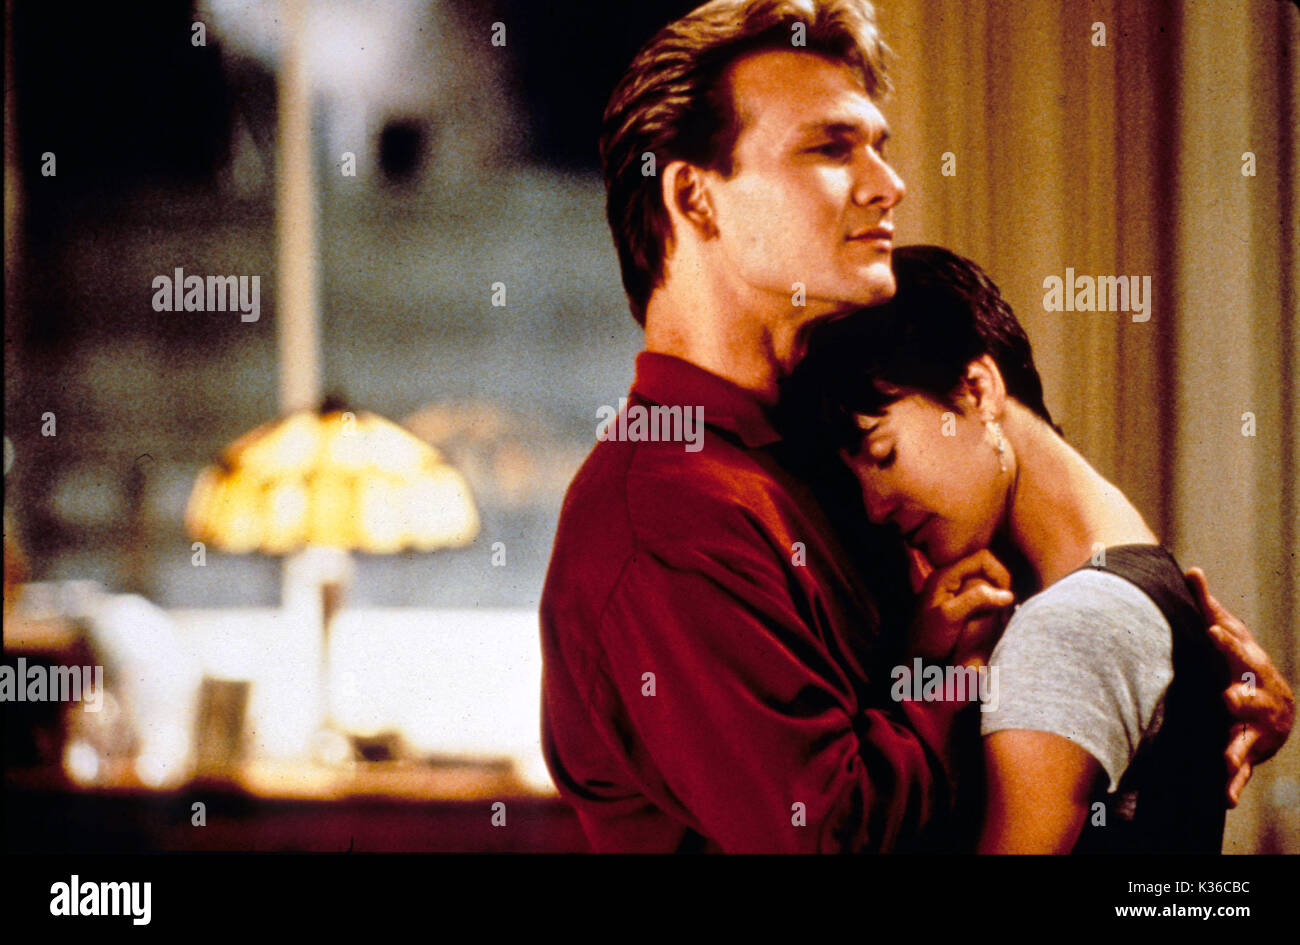 GHOST PARAMOUNT PICTURES PATRICK SWAYZE, DEMI MOORE GHOST PARAMOUNT PICTURES PATRICK SWAYZE, DEMI MOORE Picture from the Ronald Grant Archive     Date: 1990 Stock Photo